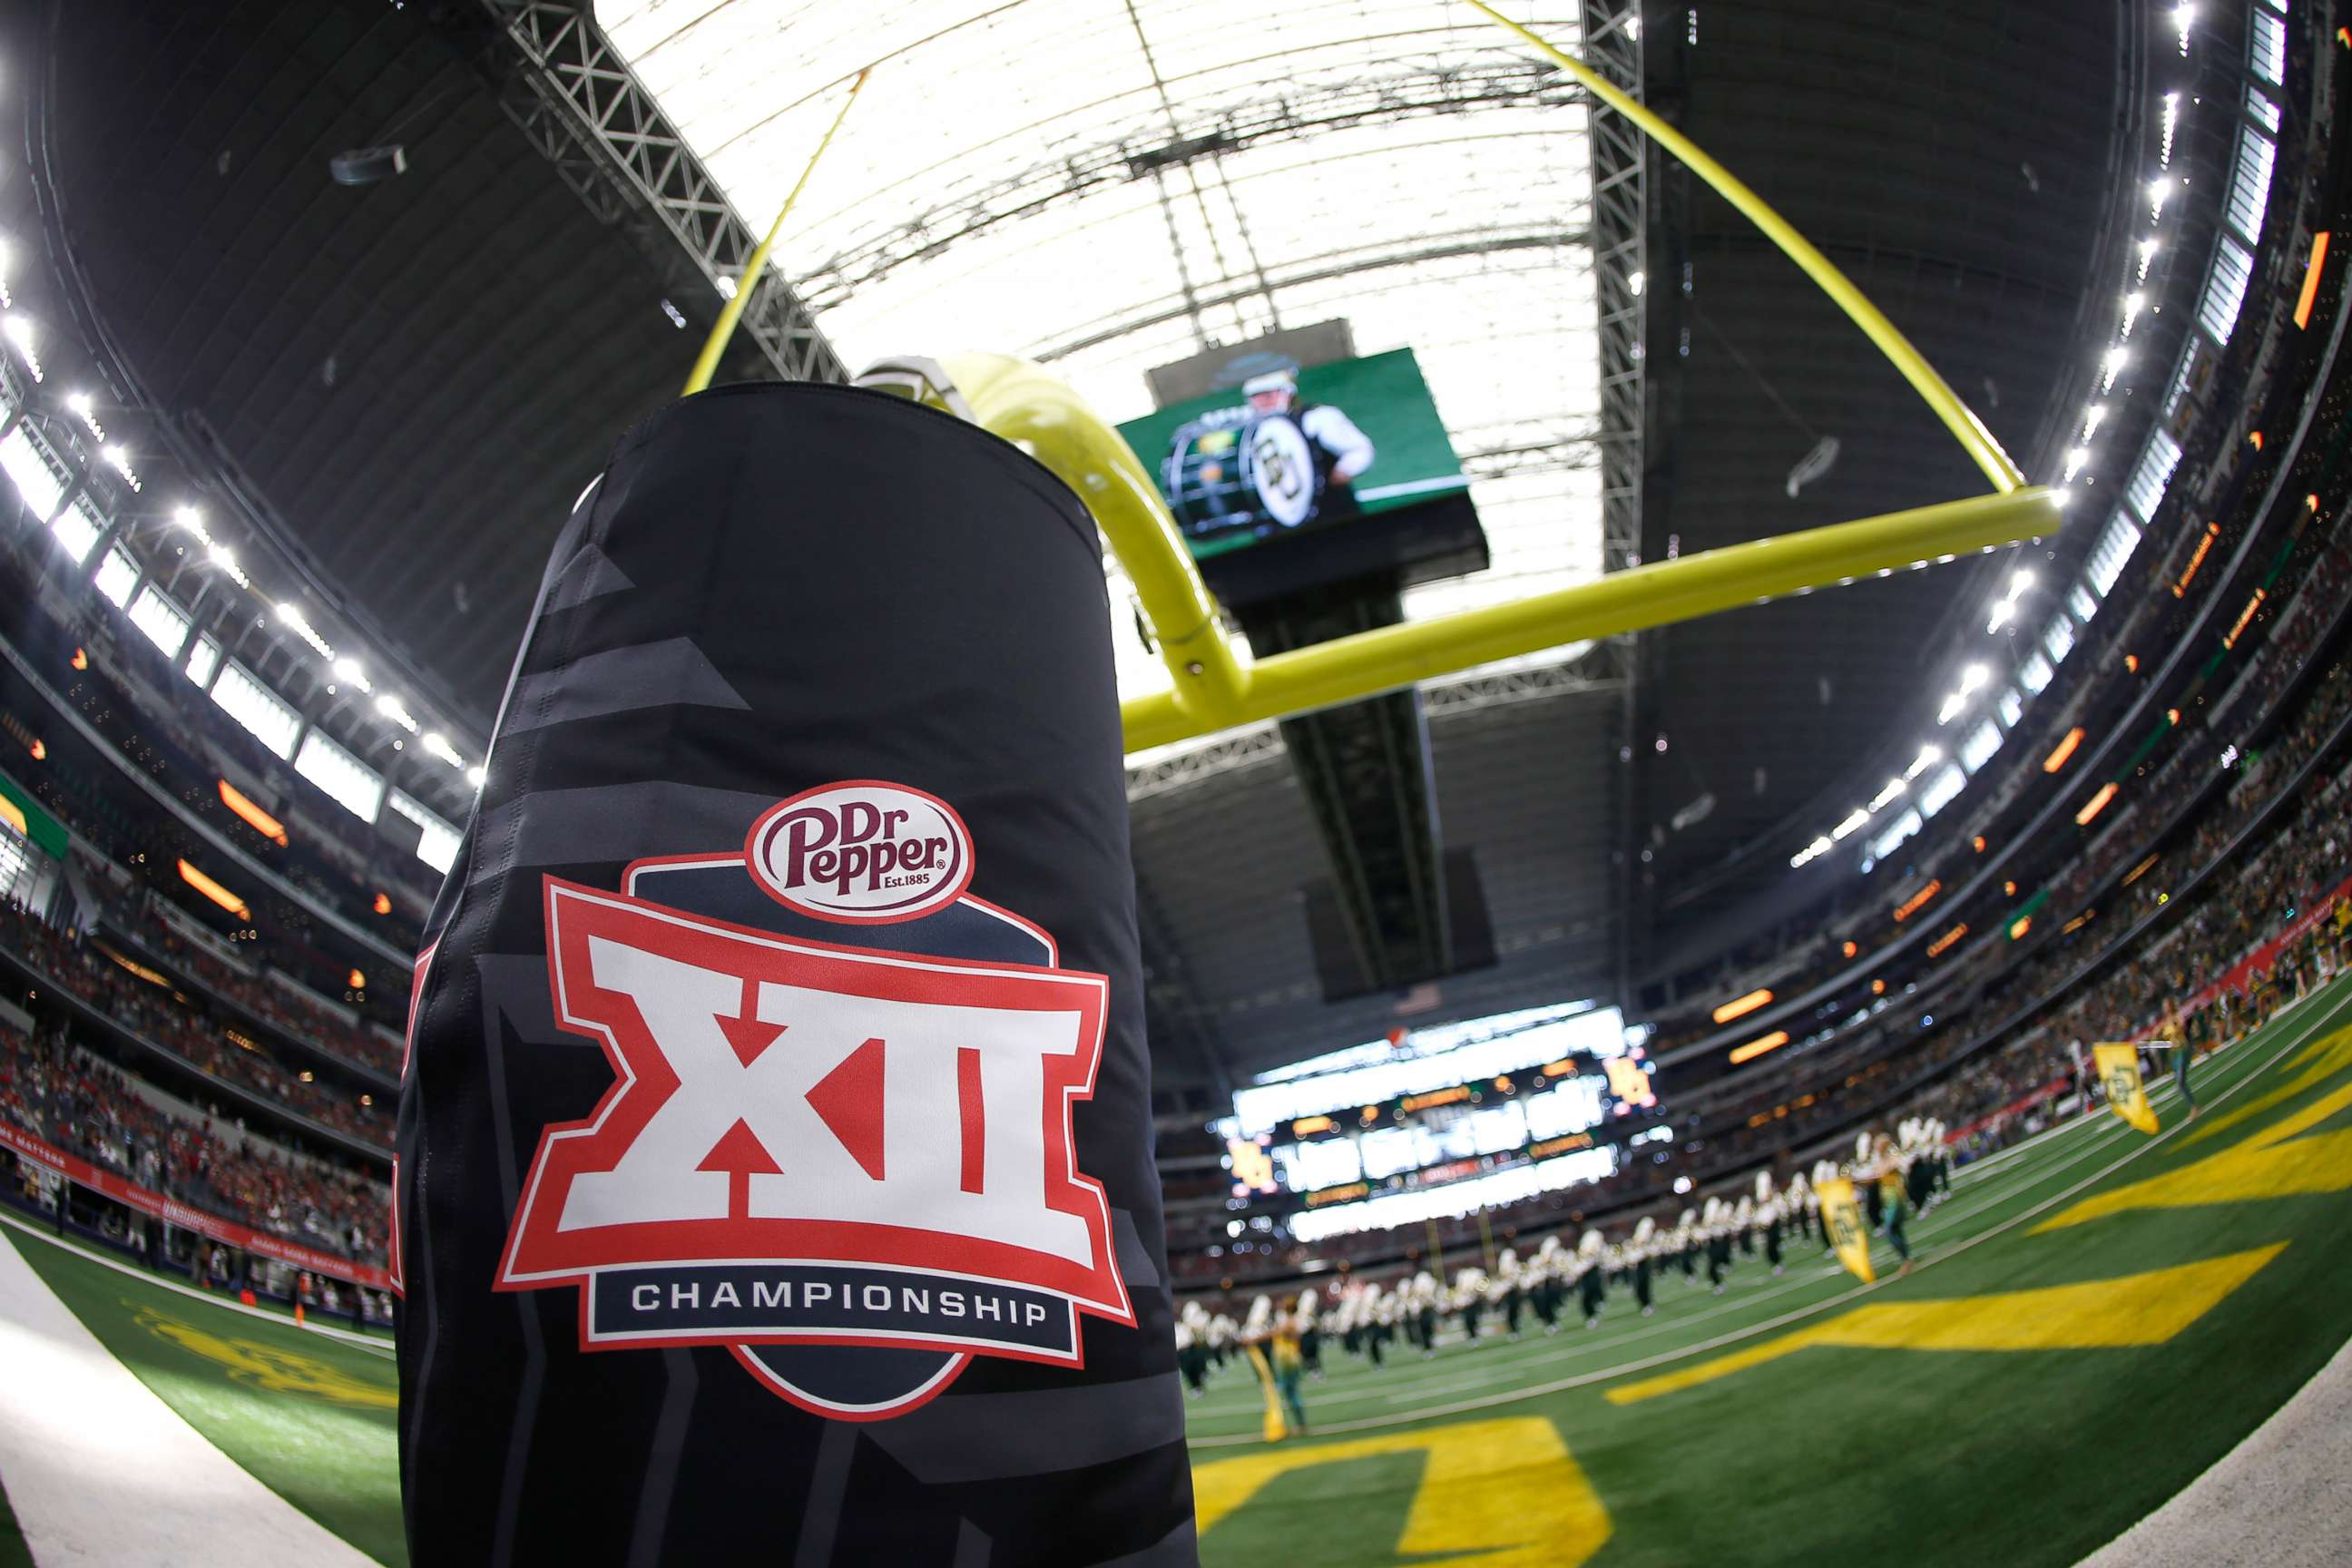 PHOTO: In this Dec. 7, 2019, file photo, a Big 12 logo is shown as the Baylor Bears band plays on the field before Baylor plays the Oklahoma Sooners in the Big 12 Football Championship at AT&T Stadium in Arlington, Texas.